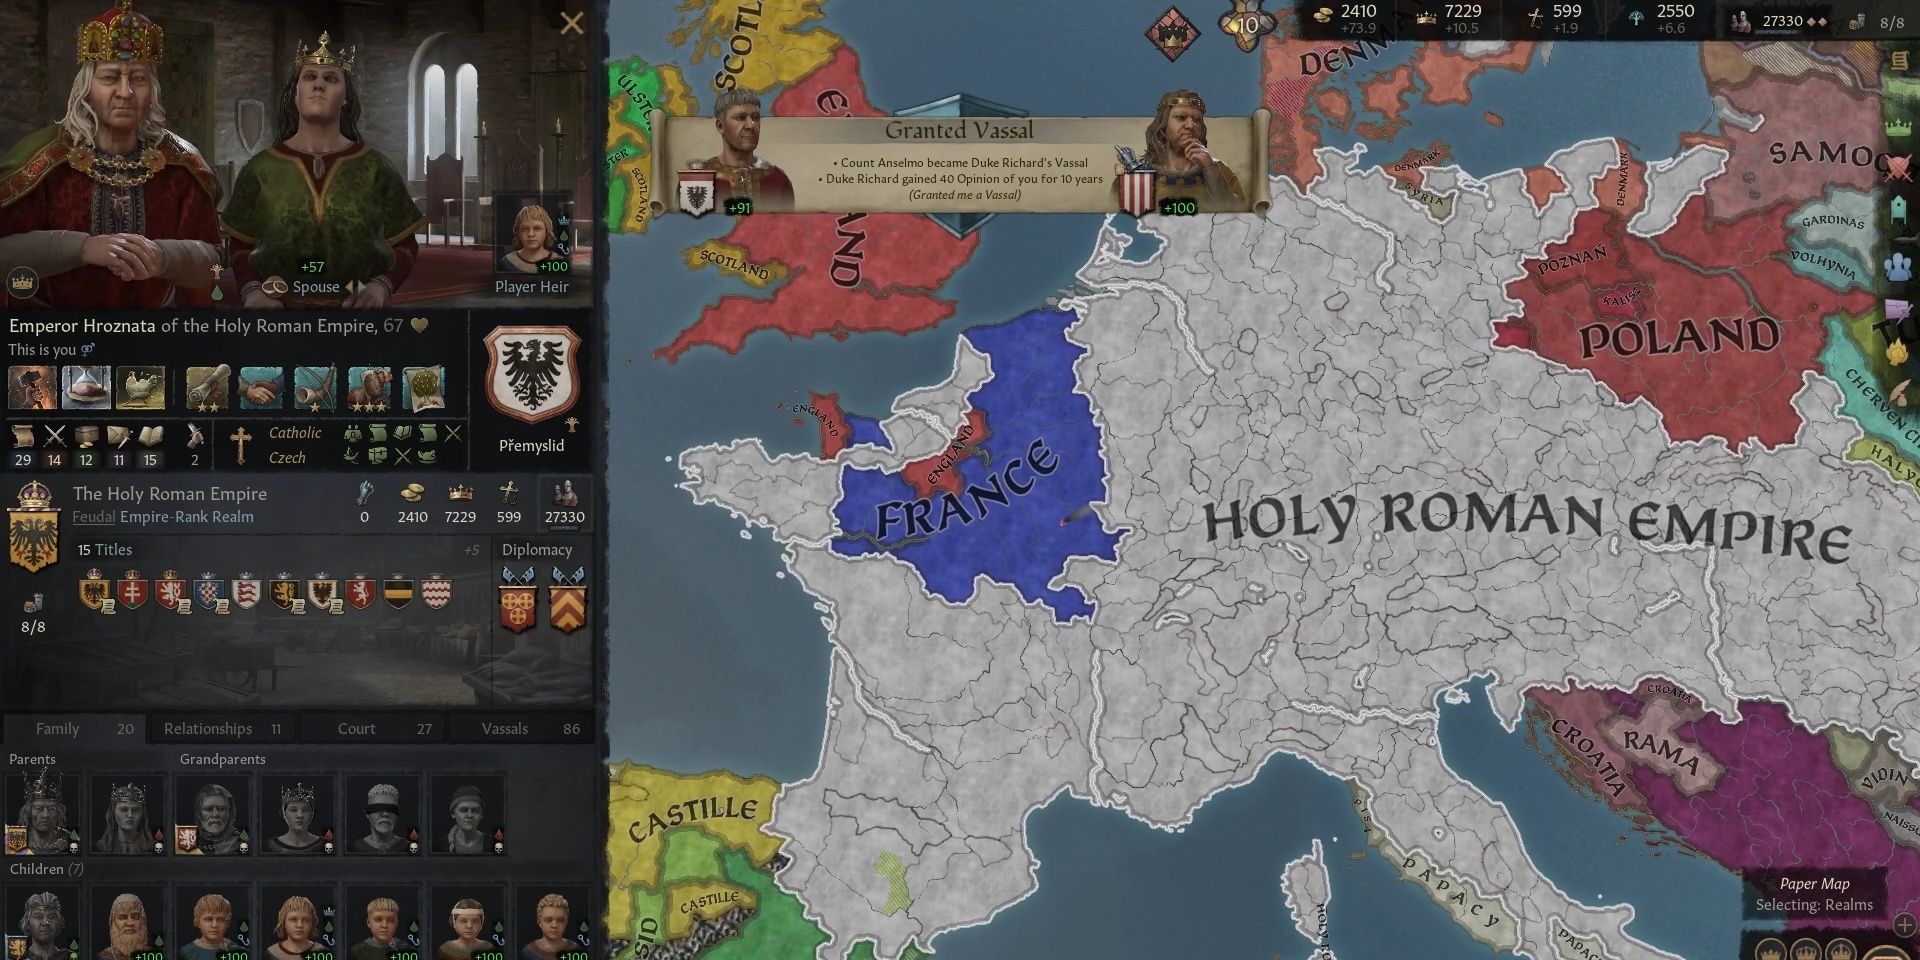 The Holy Roman Empire in Crusader Kings 3